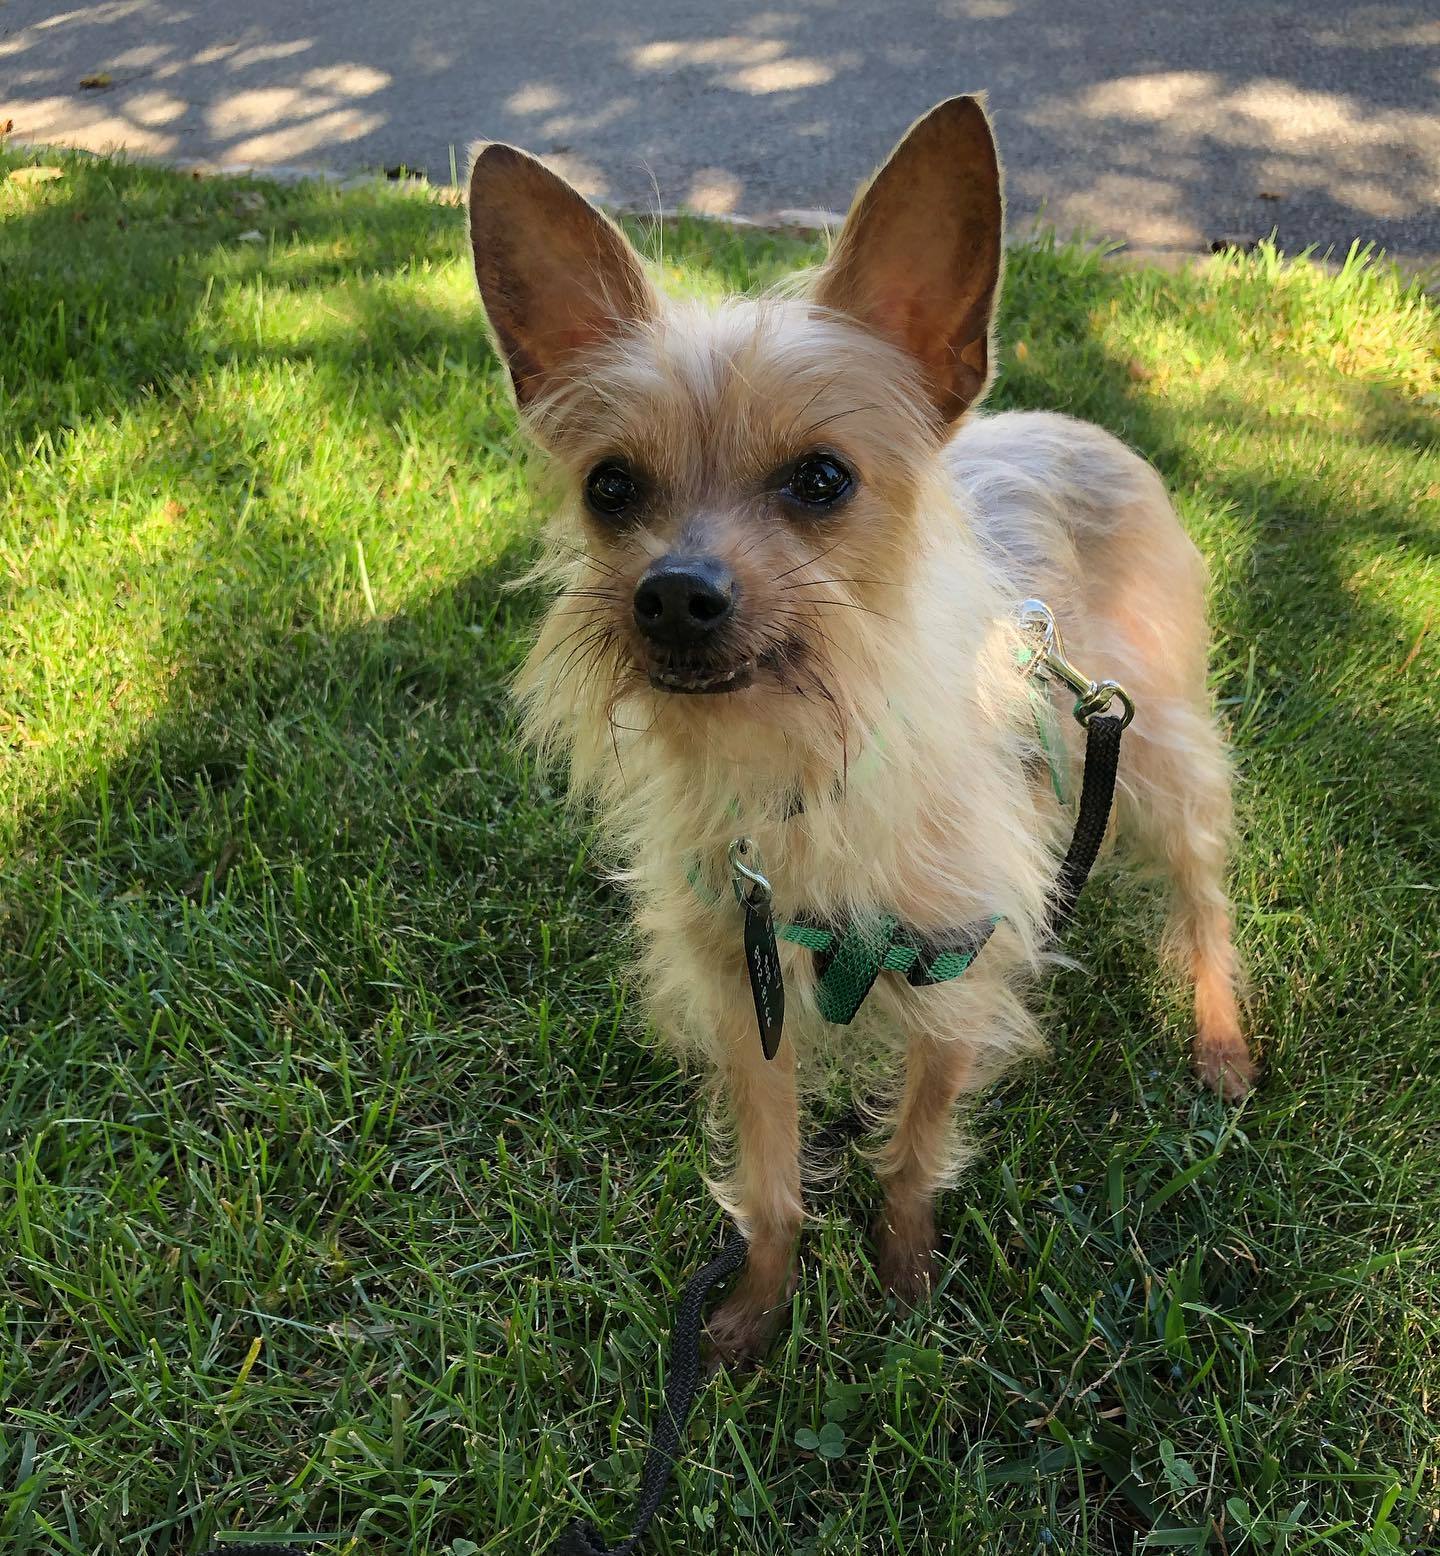 chinese crested yorkie mix